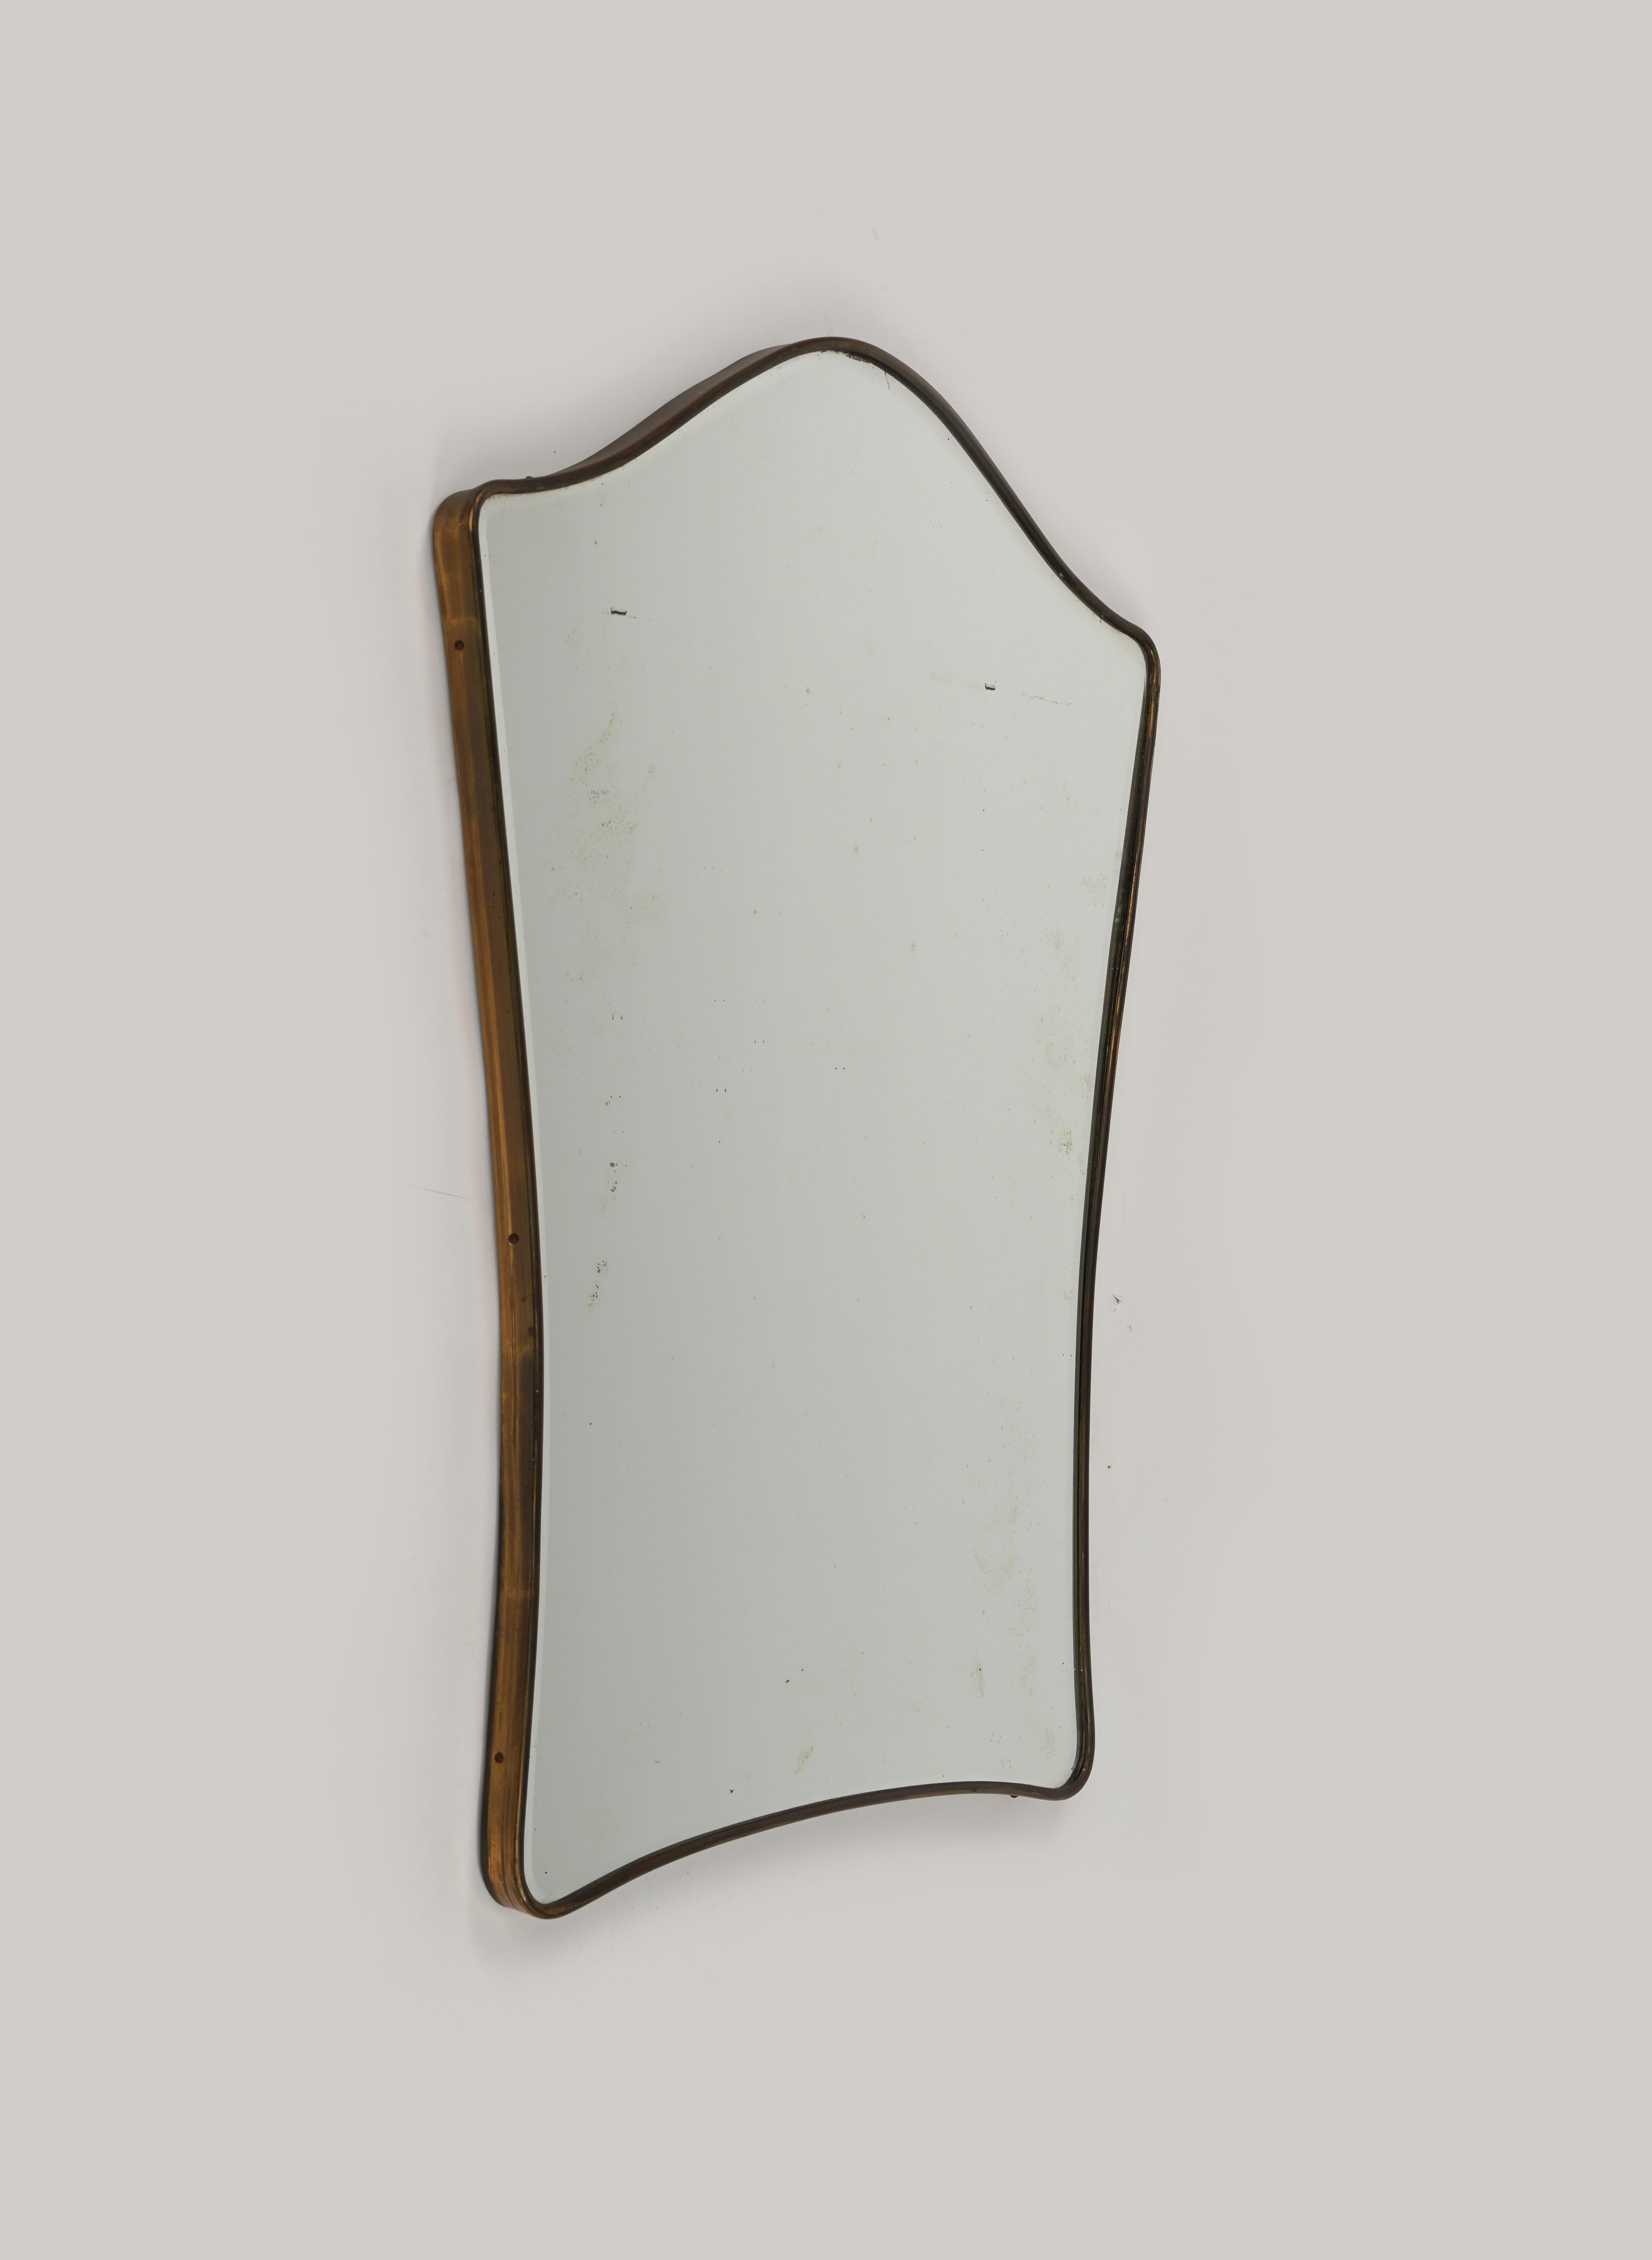 Beautiful Midcentury wall mirror in the shape of a shield framed with brass in the style of the Italian designer Gio Ponti.

Made in Italy in the 1950s.

The mirror is very well-made, original of the period, shows signs of discolouration.